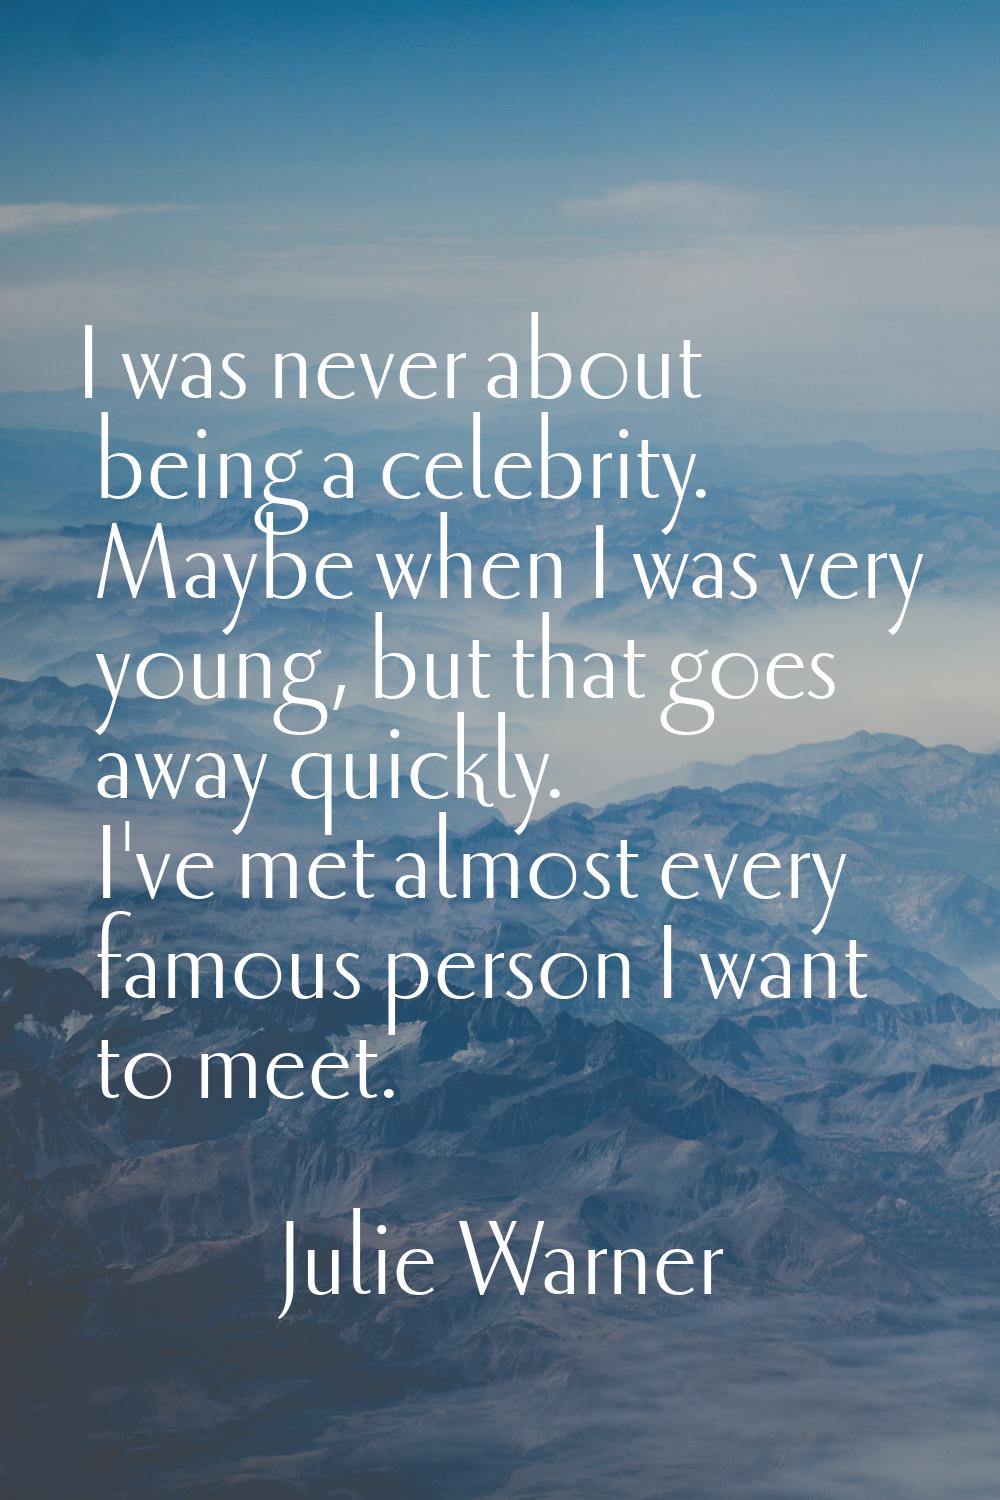 I was never about being a celebrity. Maybe when I was very young, but that goes away quickly. I've 